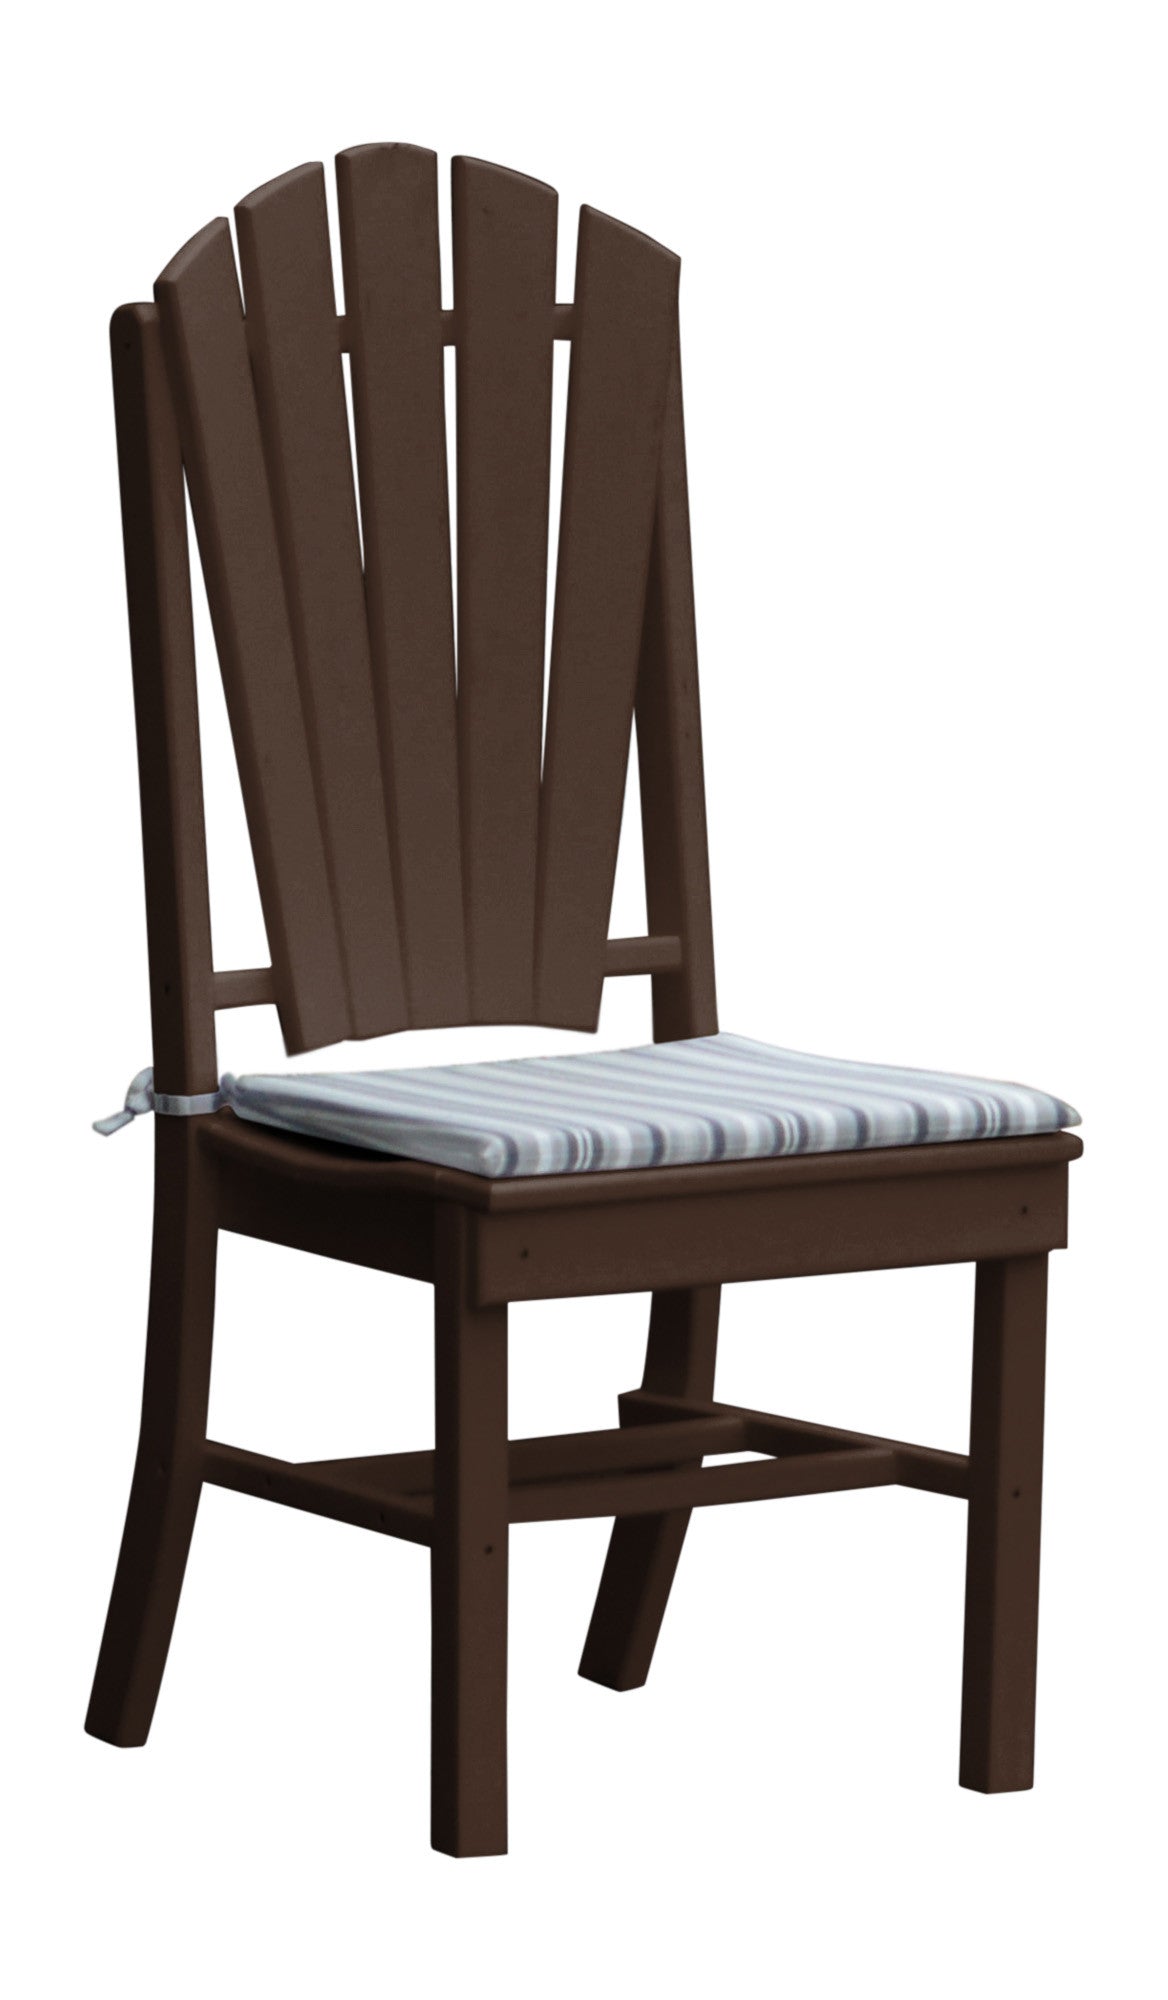 A&L Furniture Company Recycled Plastic Adirondack Dining Chair - Tudor Brown